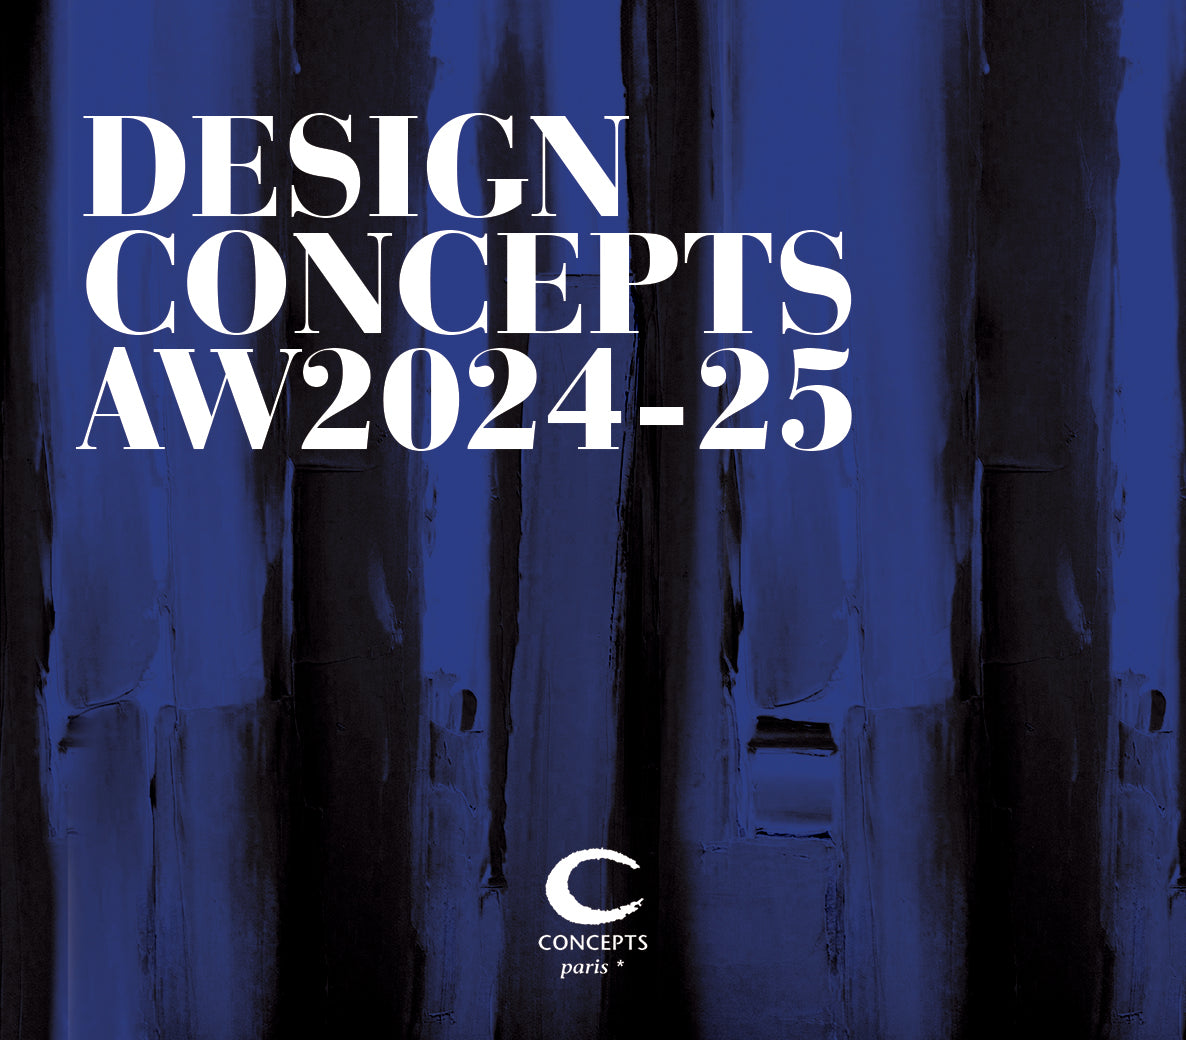 Design Concepts AW24-25 Lingerie & Loungewear - YEAR SUBSCRIPTION